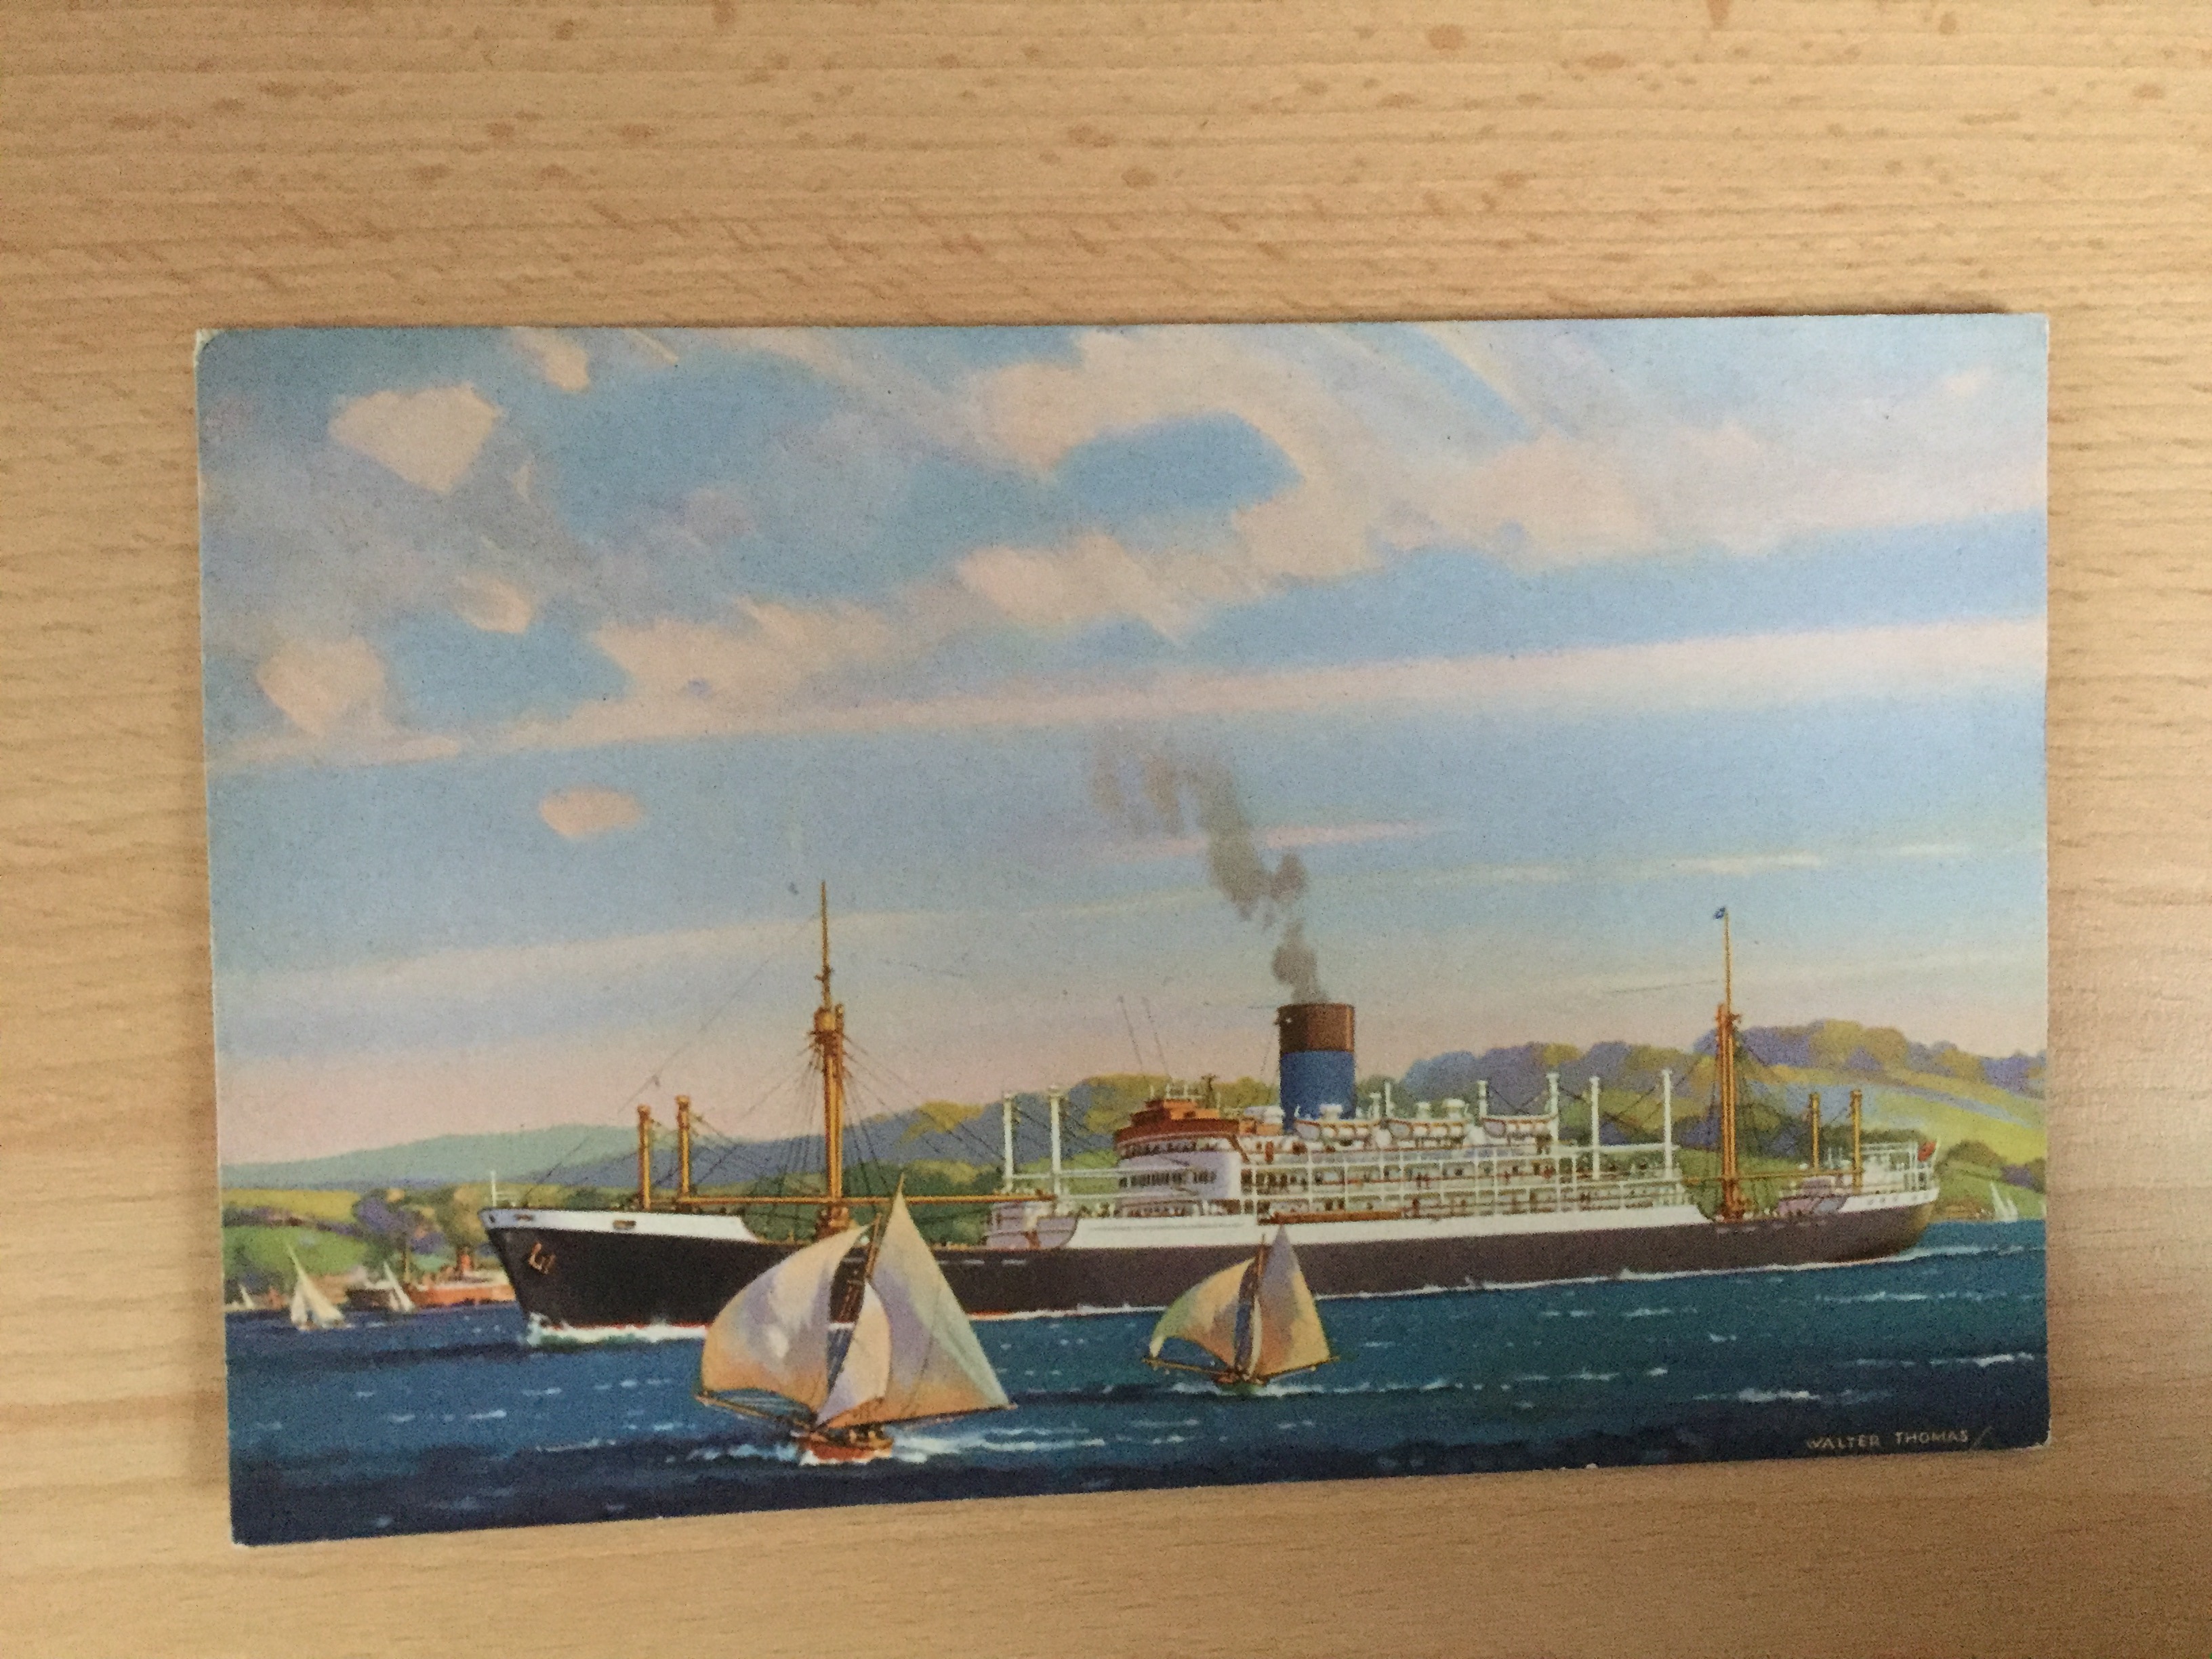 VERY EARLY COLOUR POSTCARD FROM THE BLUE FUNNEL LINE VESSEL THE SS PATROCLUS